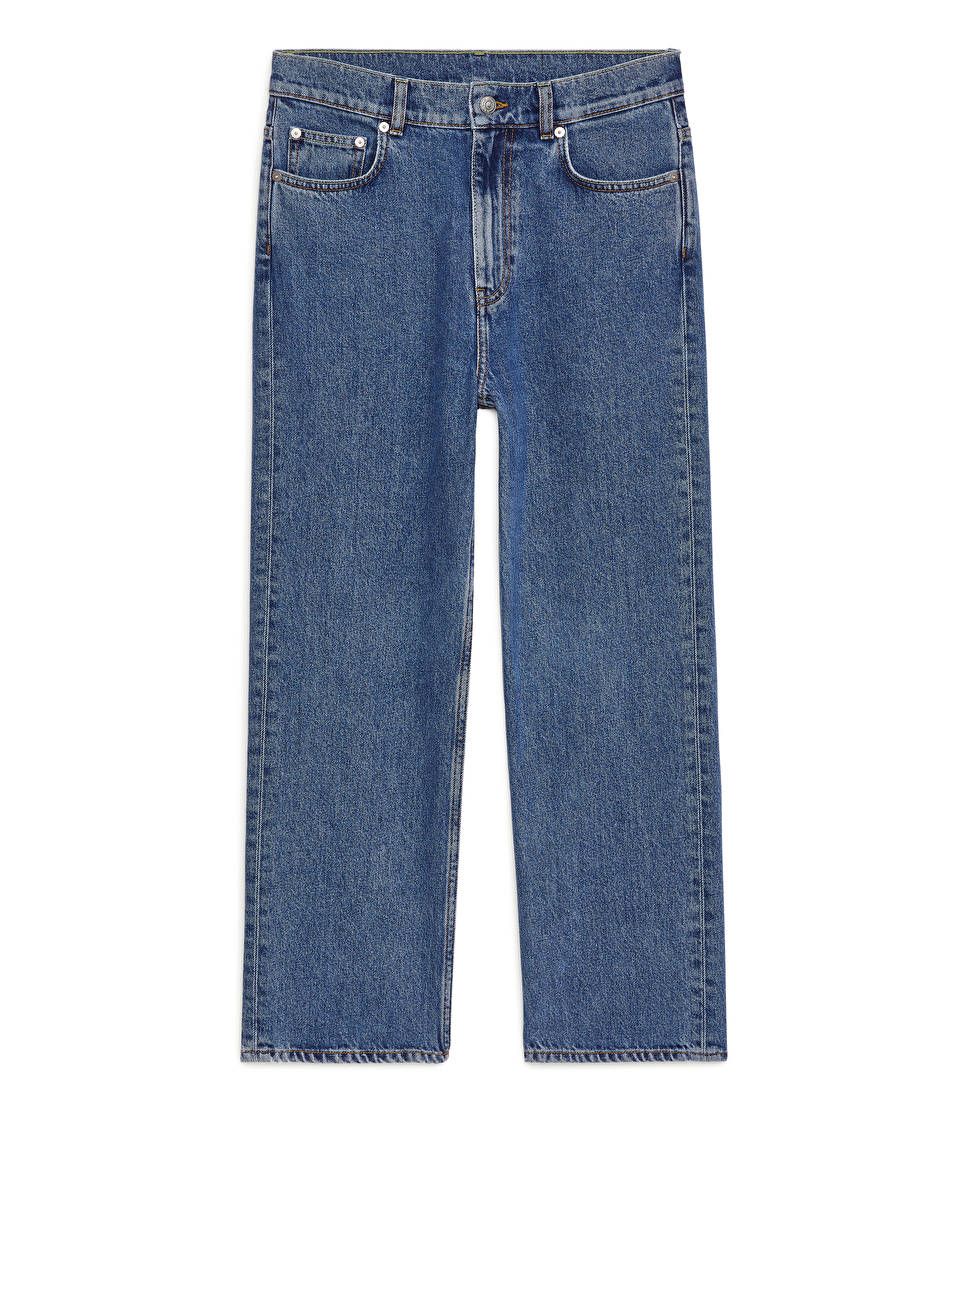 STRAIGHT CROPPED Jeans | ARKET (US&UK)